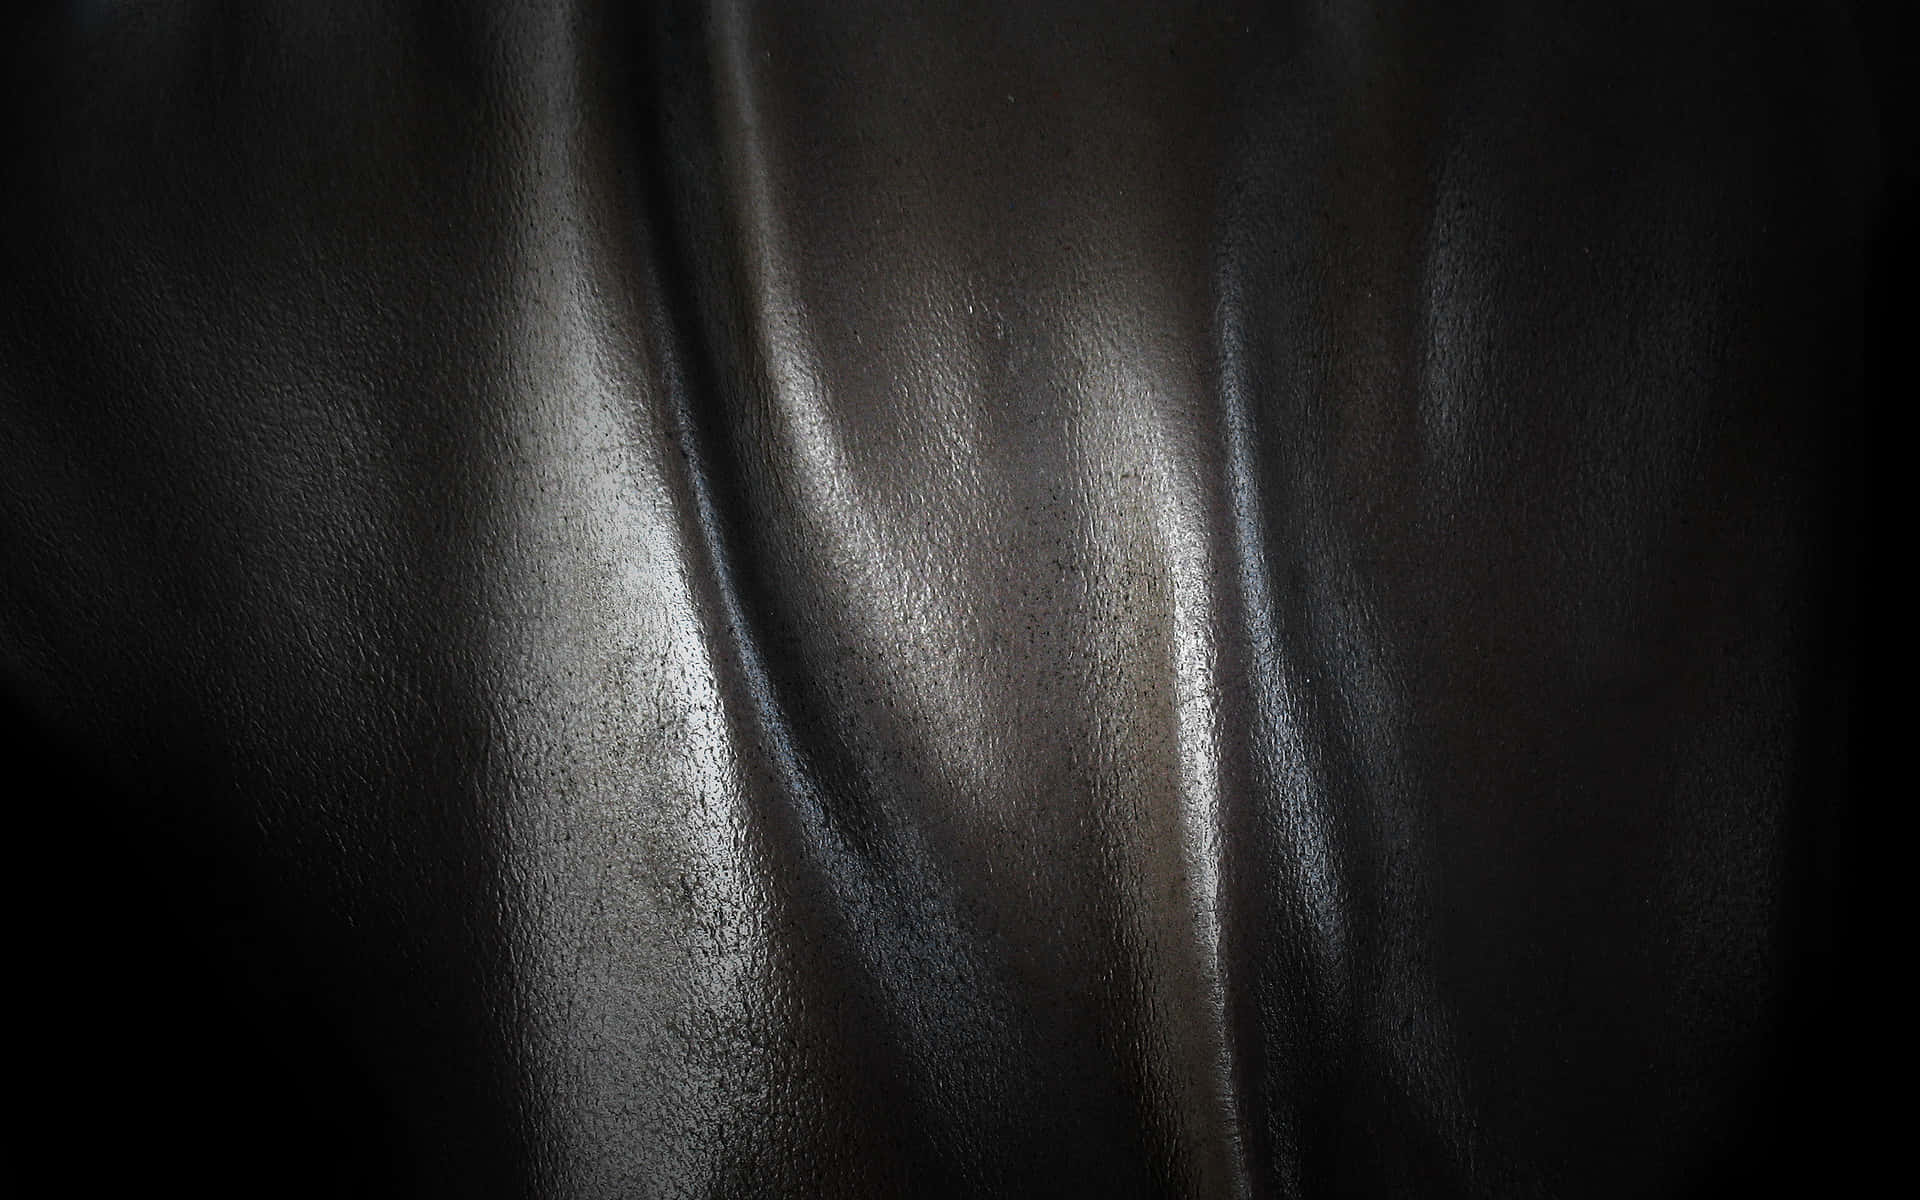 Leather Material Texture: Background Images & Pictures